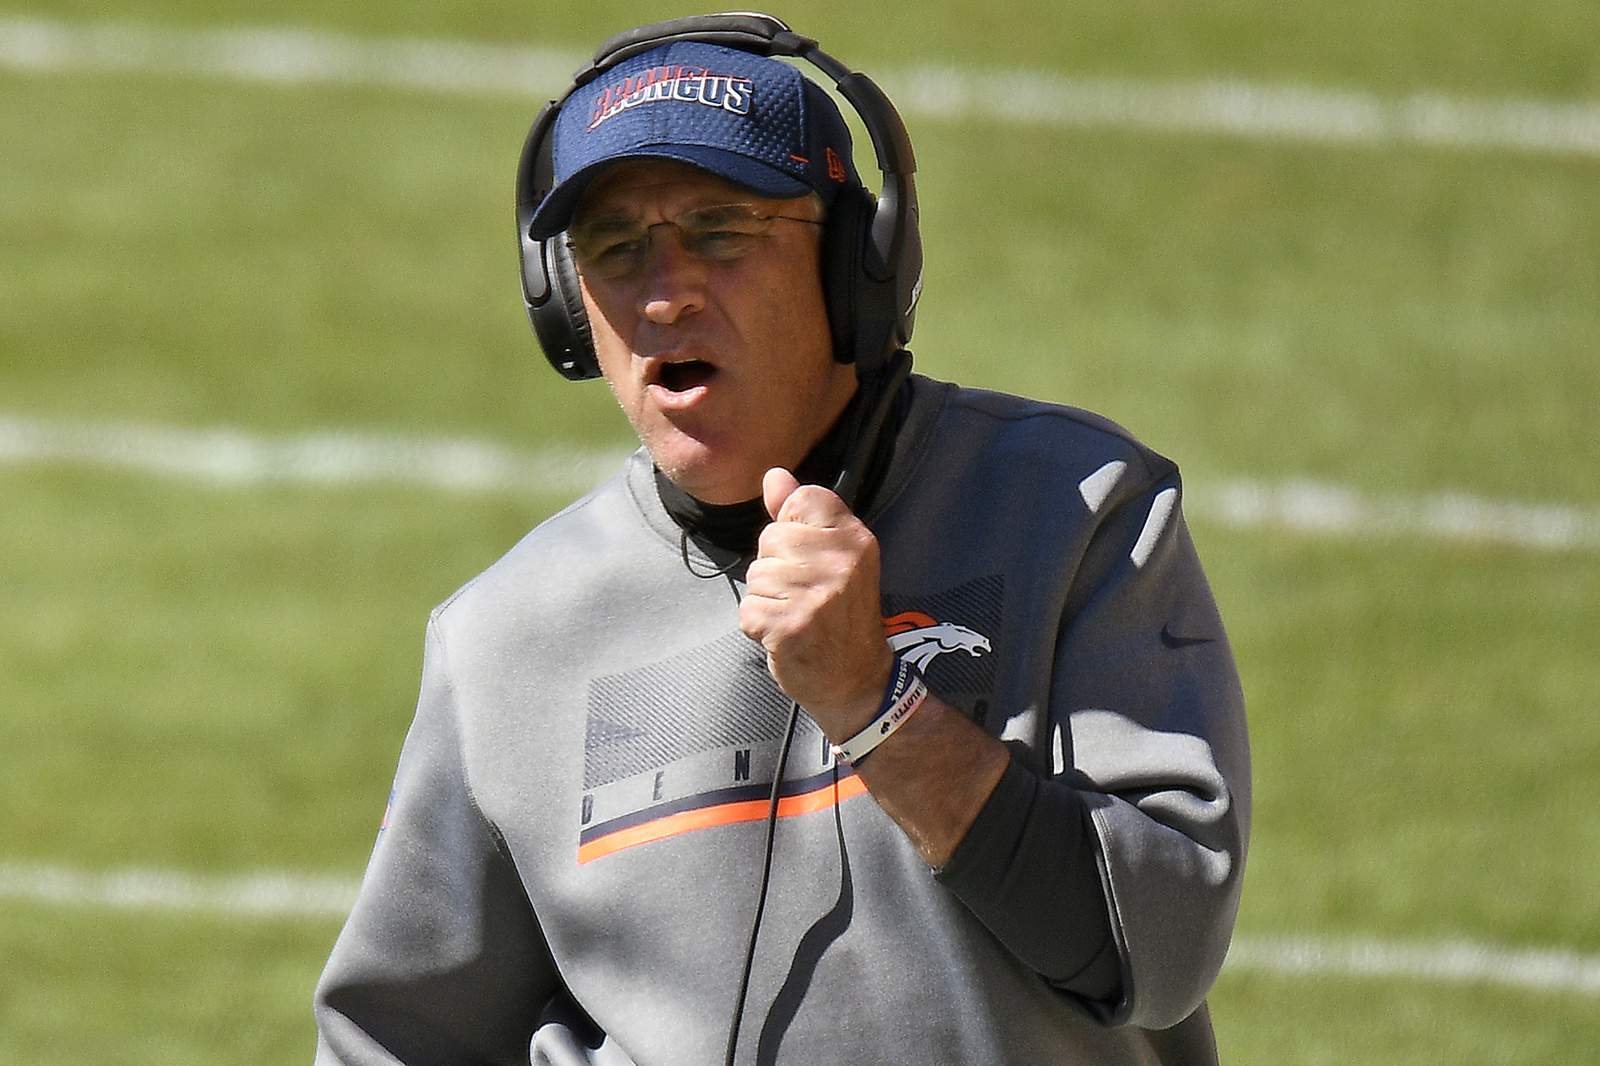 Broncos coach: virus outbreak shows who the ‘whiners are’